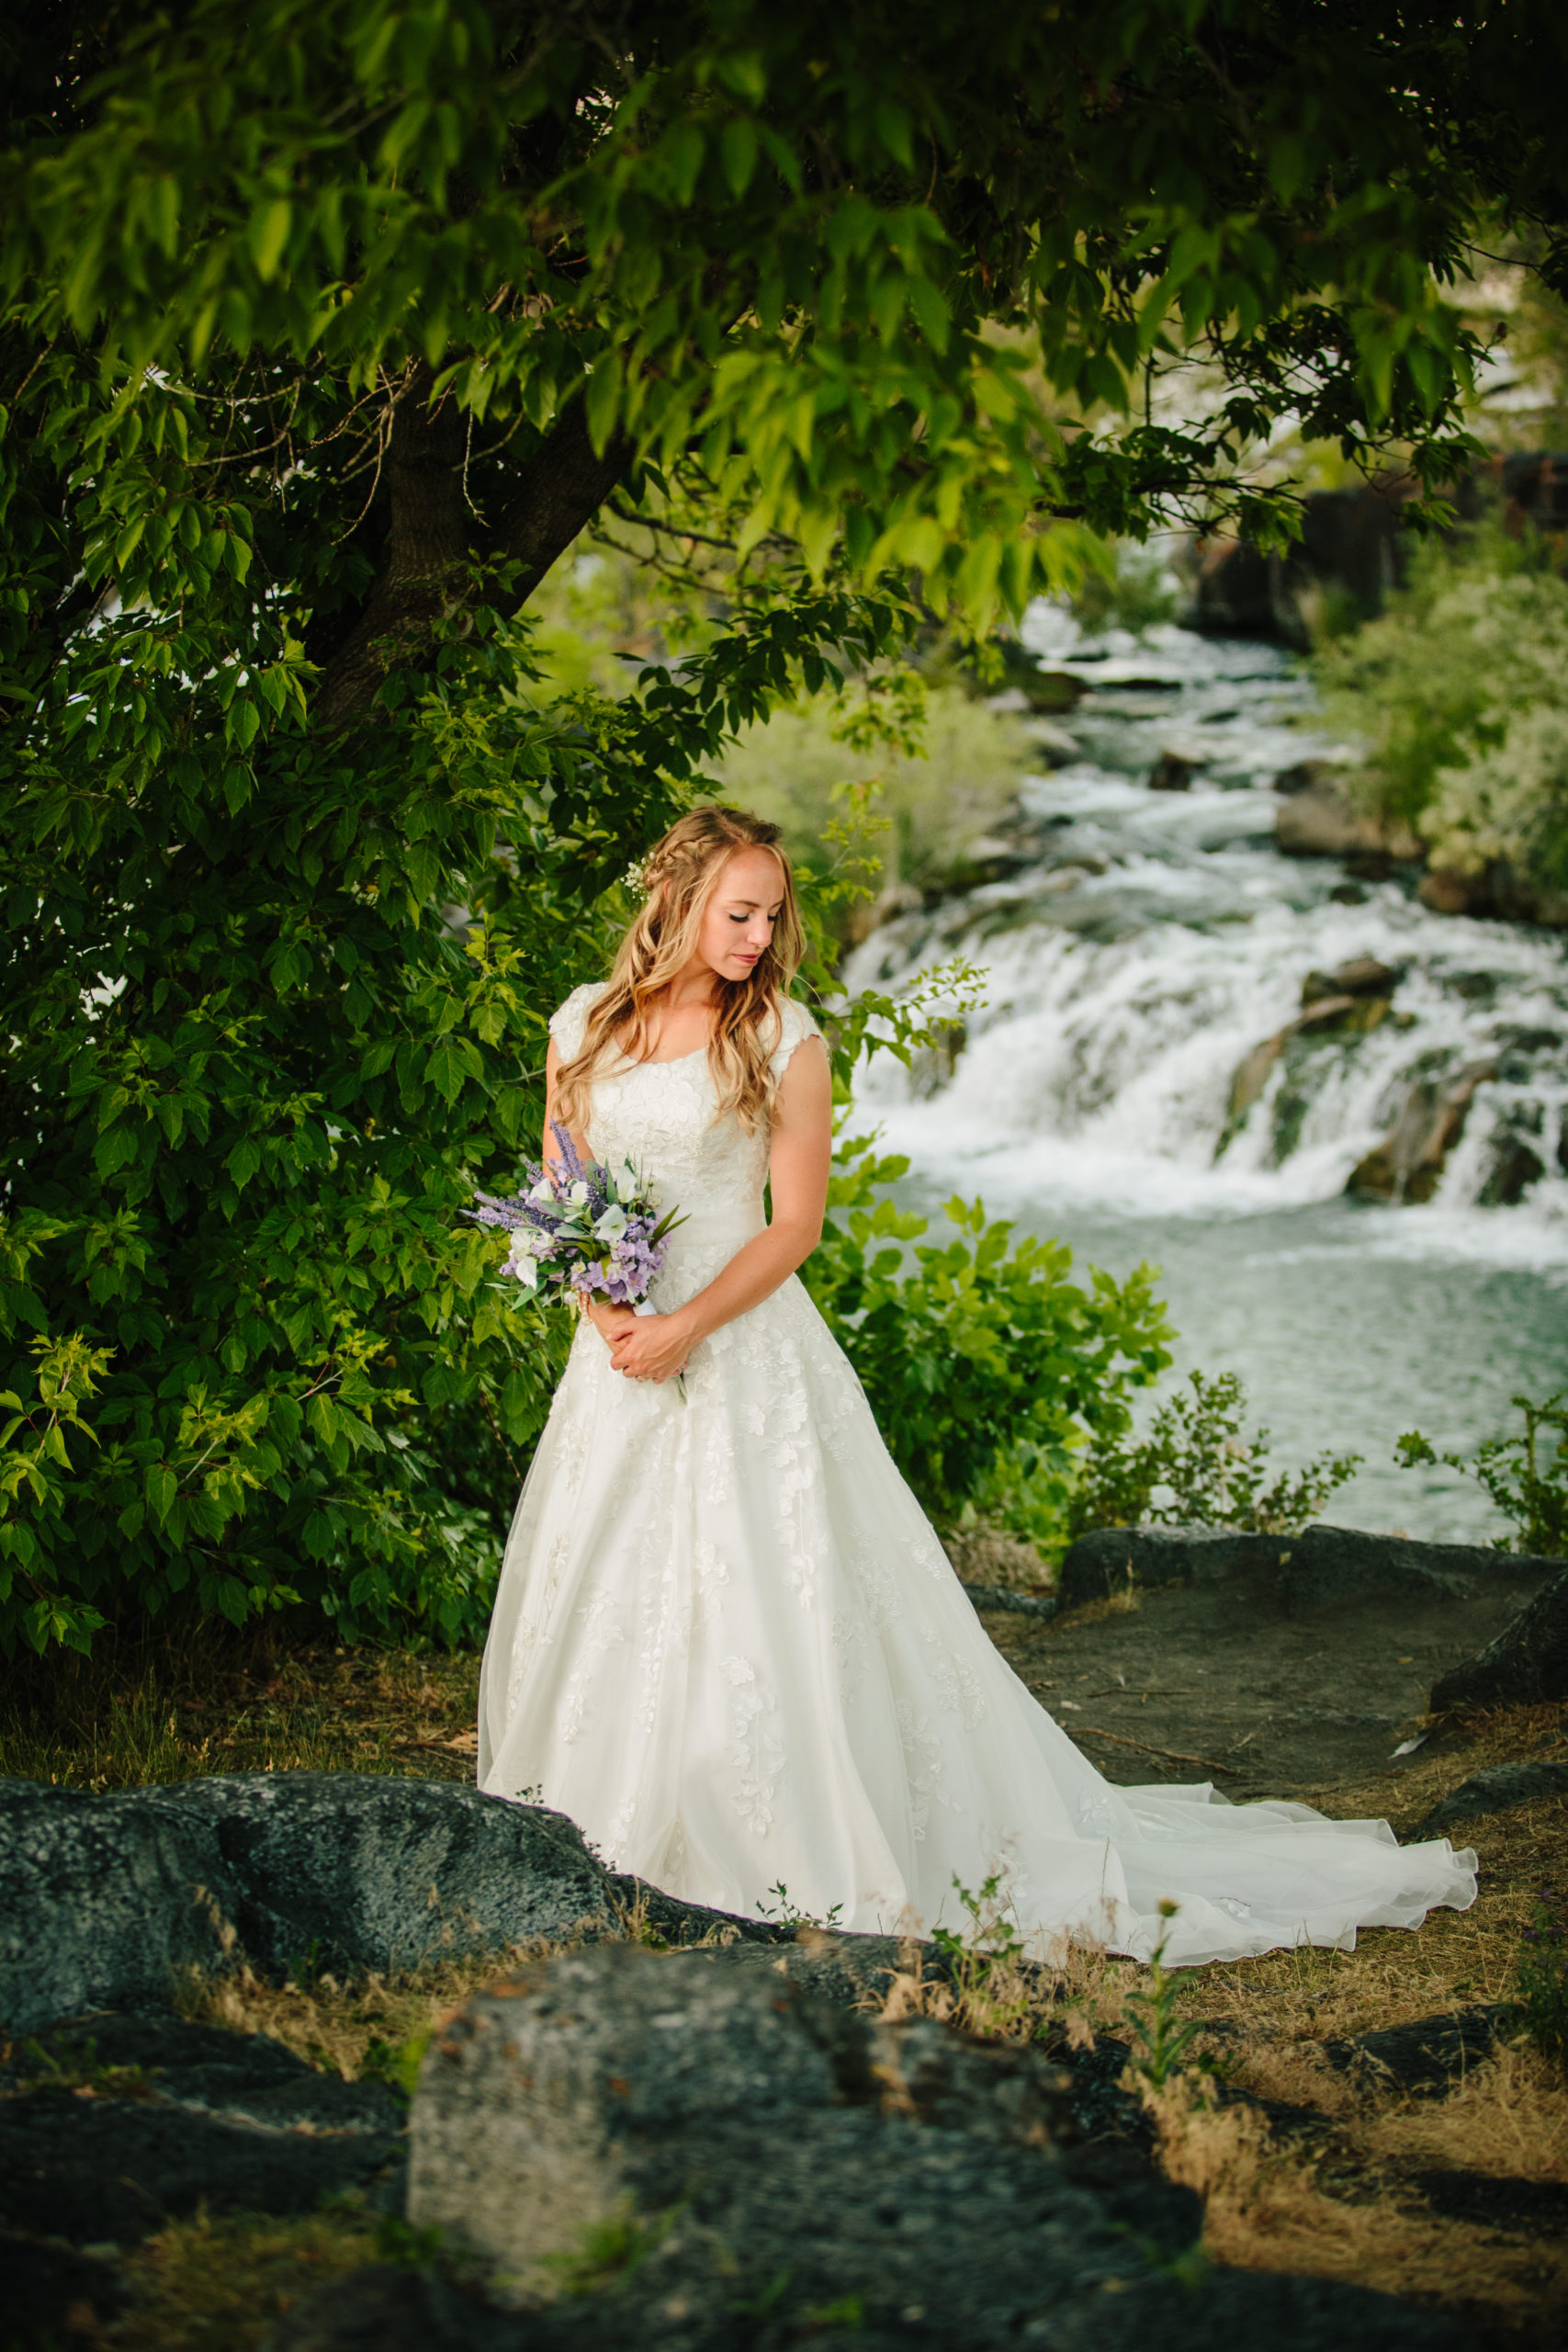 bride posing in her wedding gown with her wedding dress train behind her in a lush green forrest